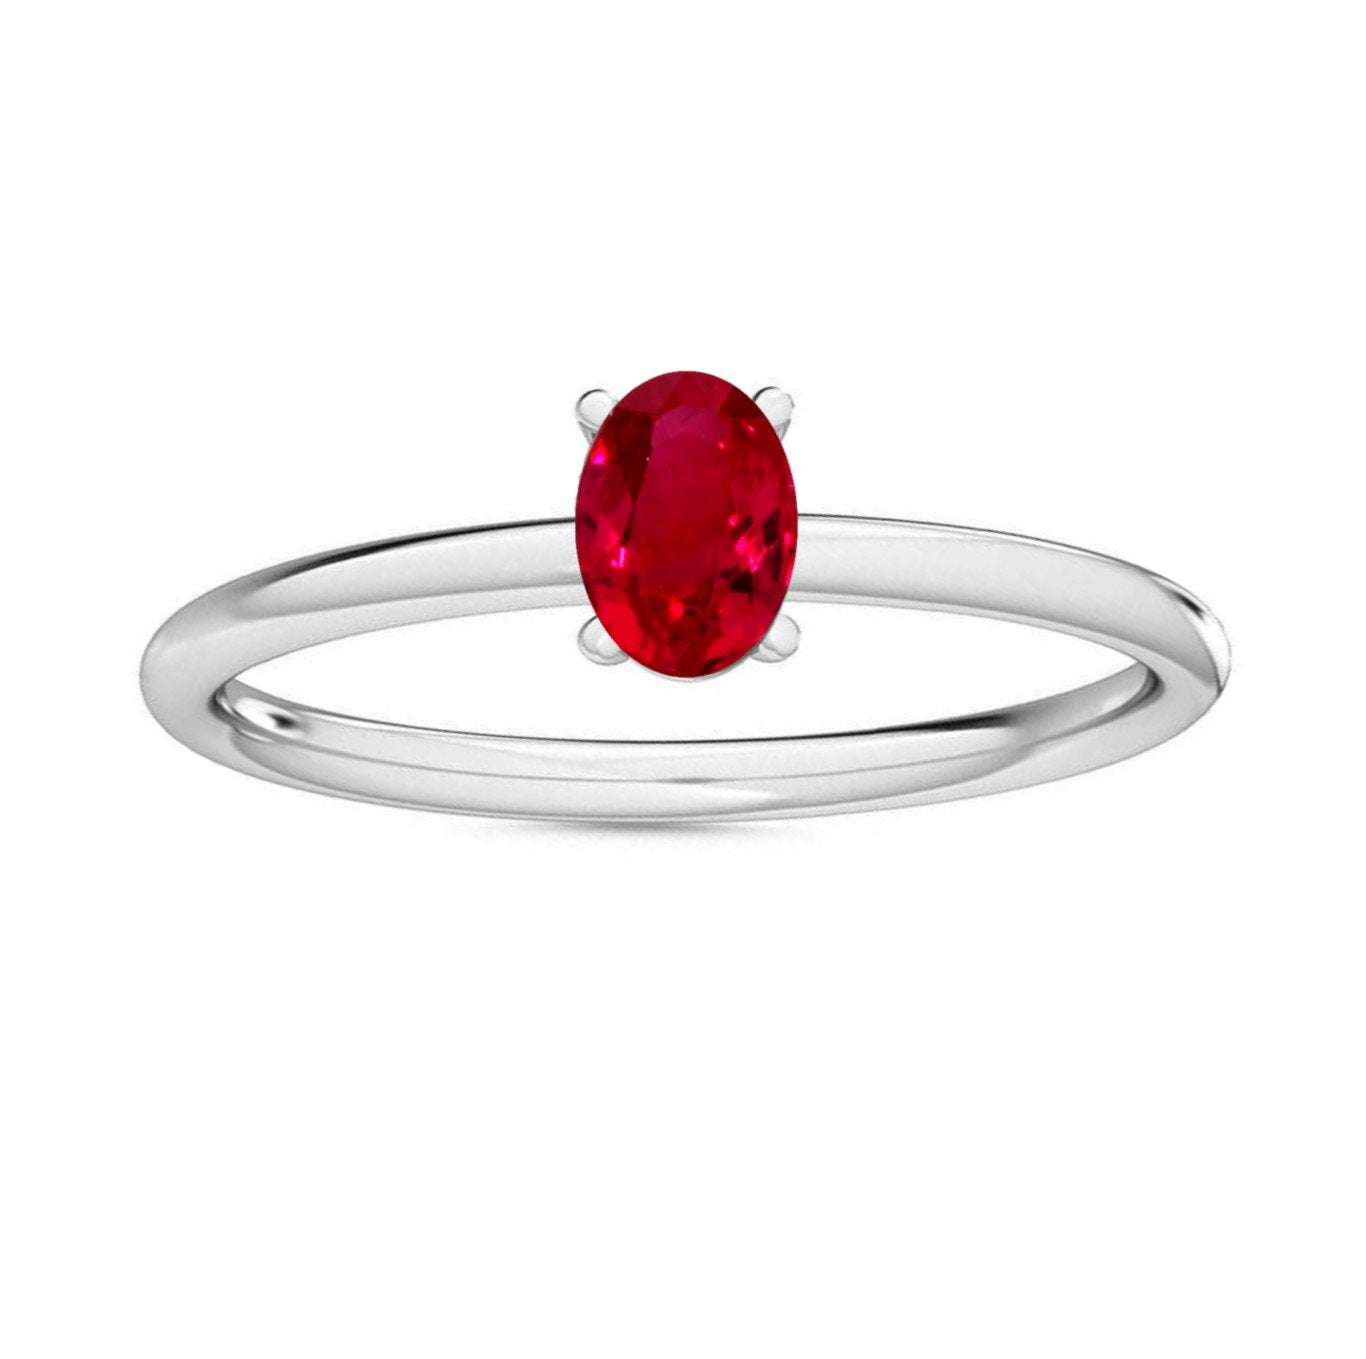 Emerald Ruby Sapphire Petite-Minimalist-Precious Gemstone-Solitaire-Engagement-Promise-Ring for Women,-14k-White-Rose-Yellow-Gold, Fine Jewelry